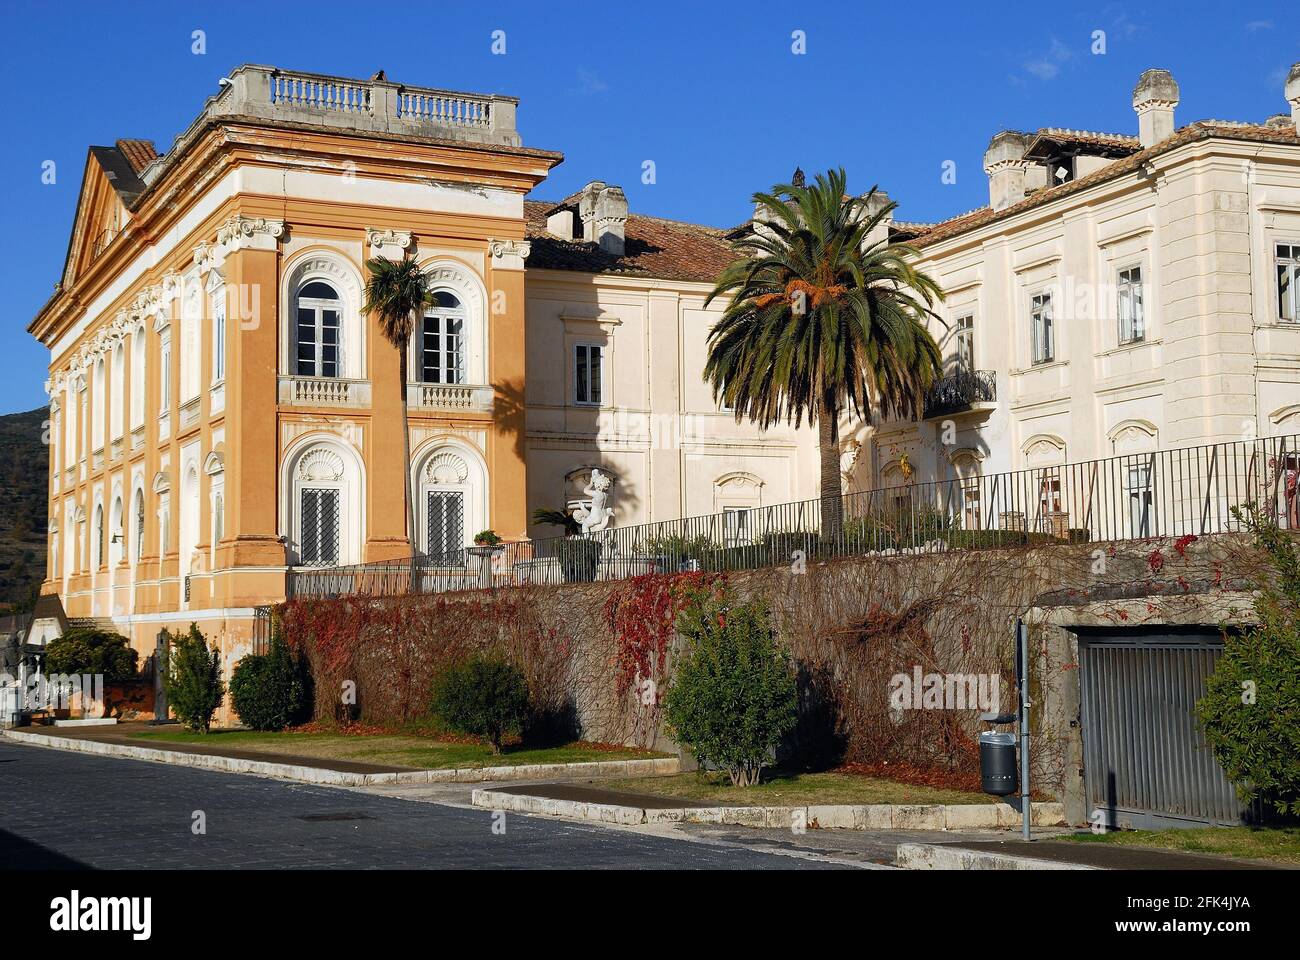 San Leucio, Caserta, Italy. It is included  in the UNESCO World Heritage sites list in 1997. The Palazzo Belvedere. Stock Photo